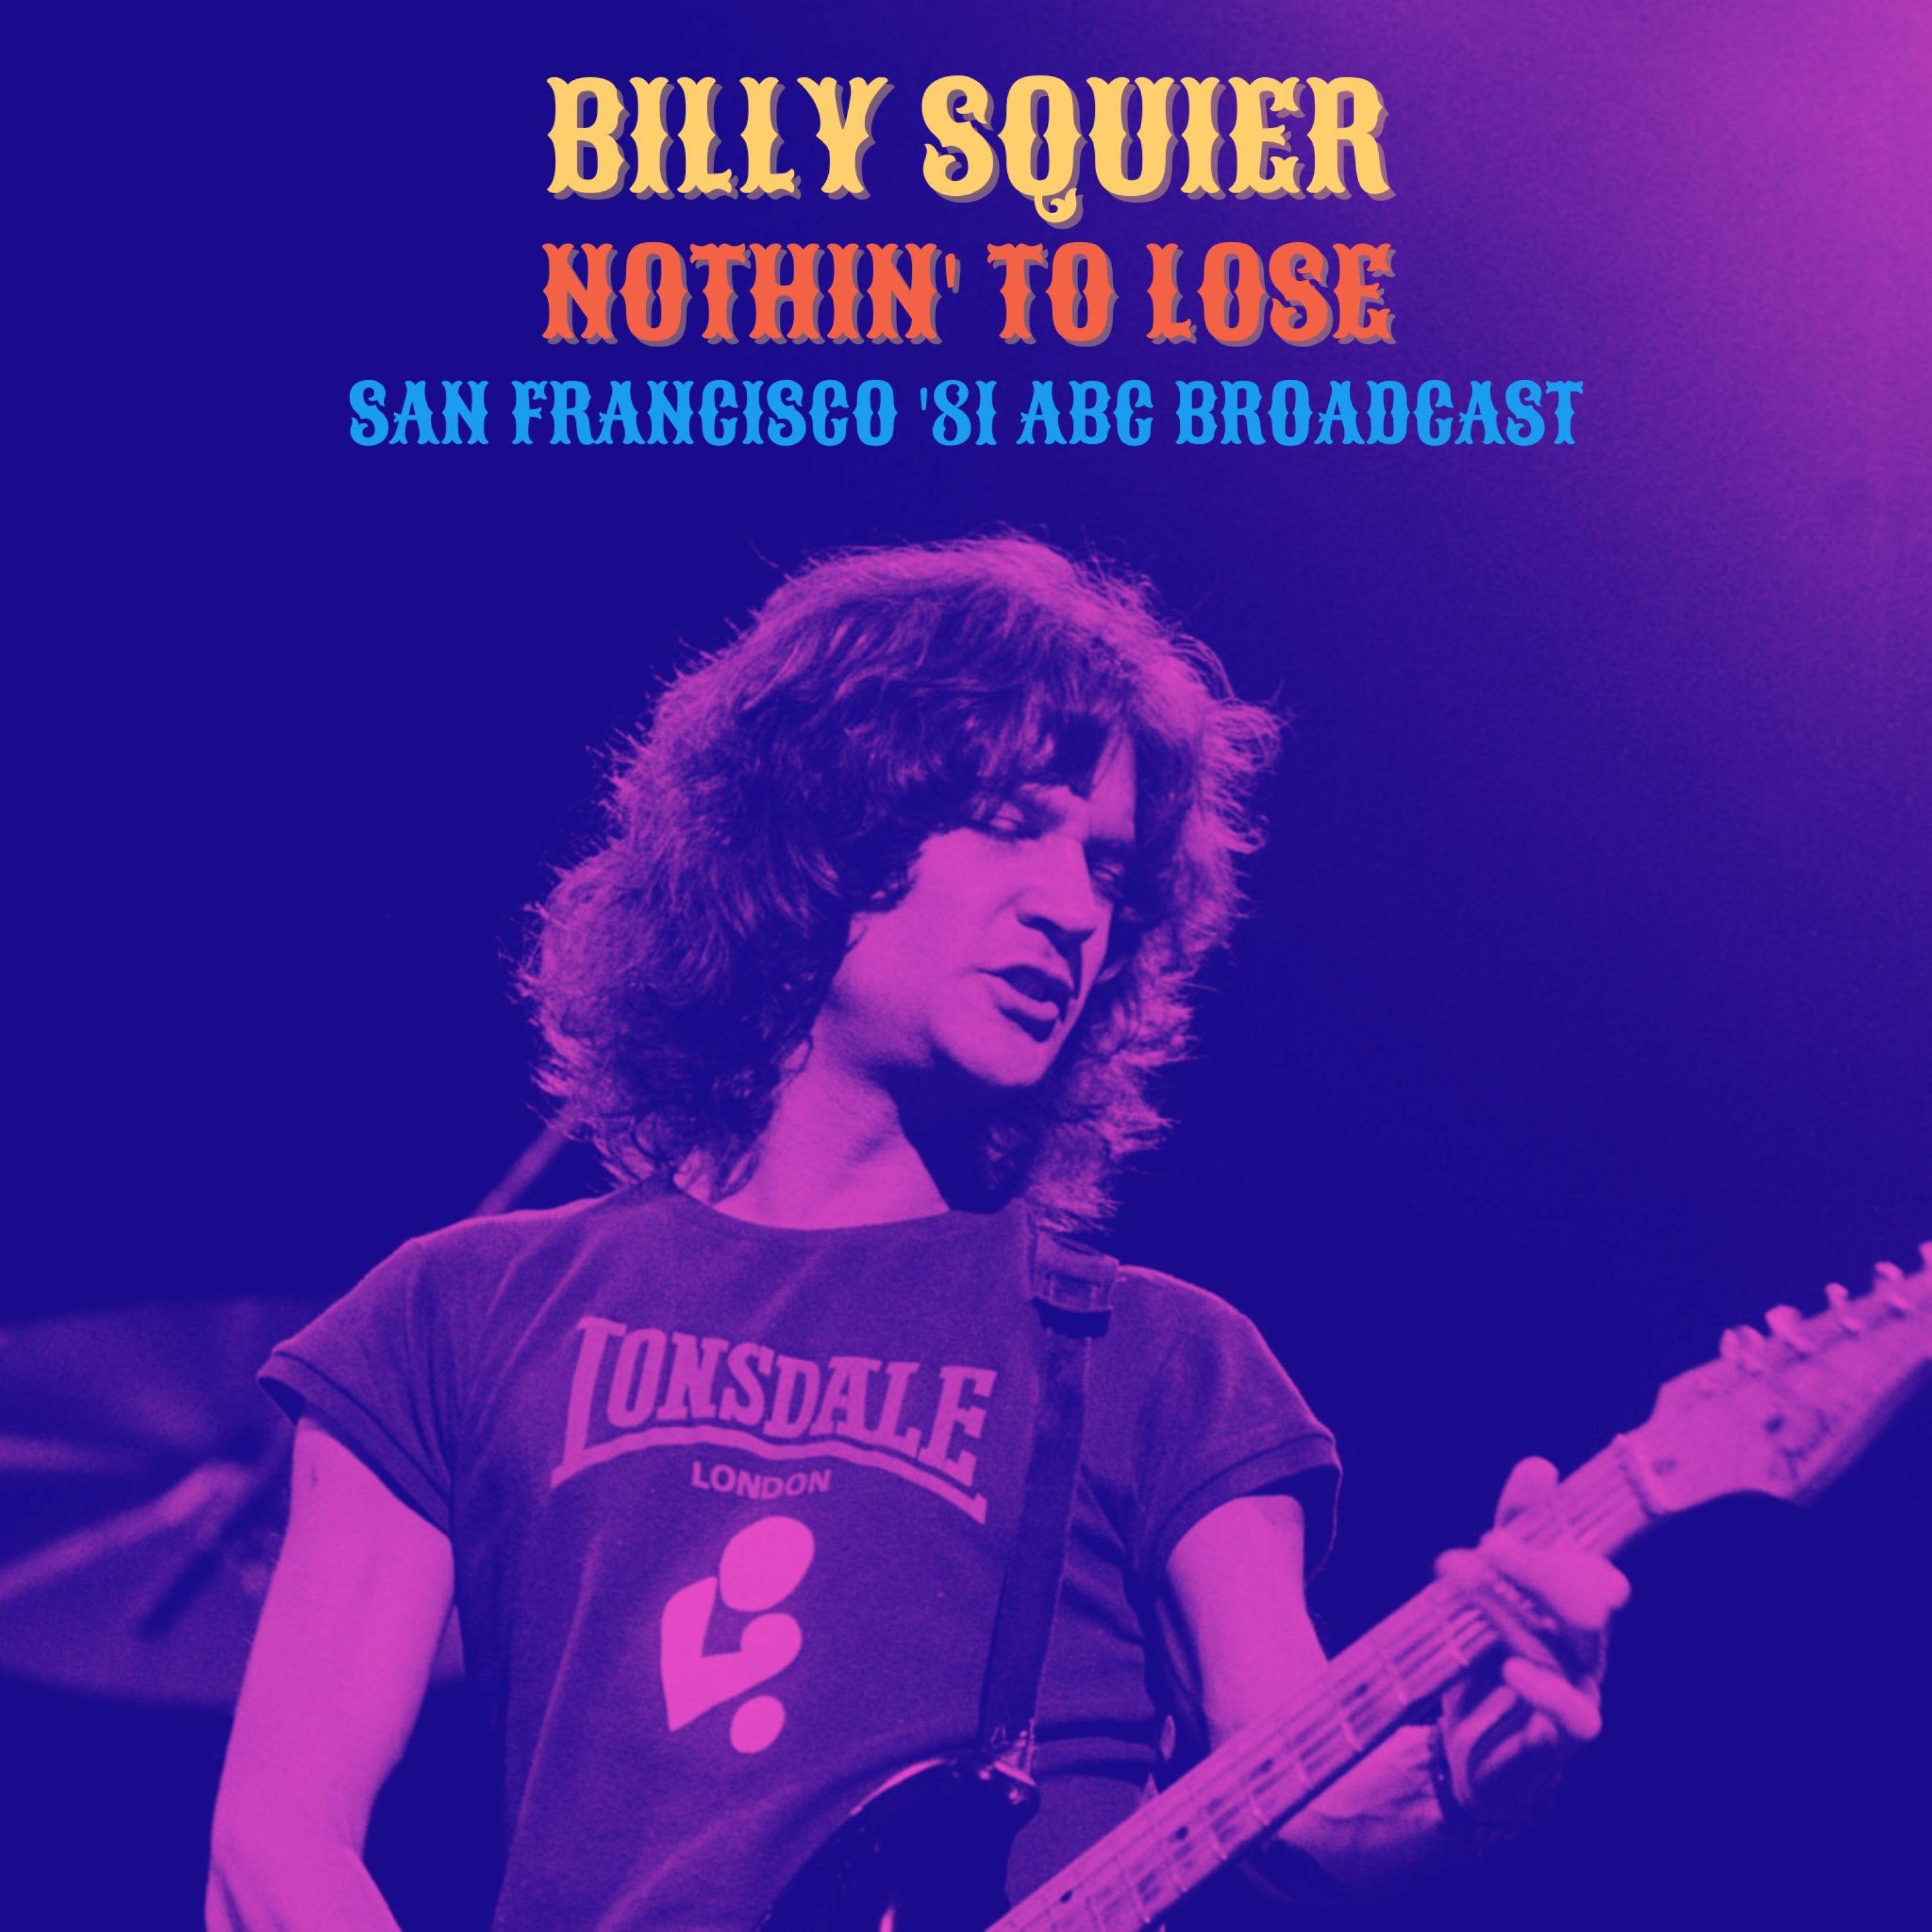 Billy Squier - Whadda You Want From Me (Live)